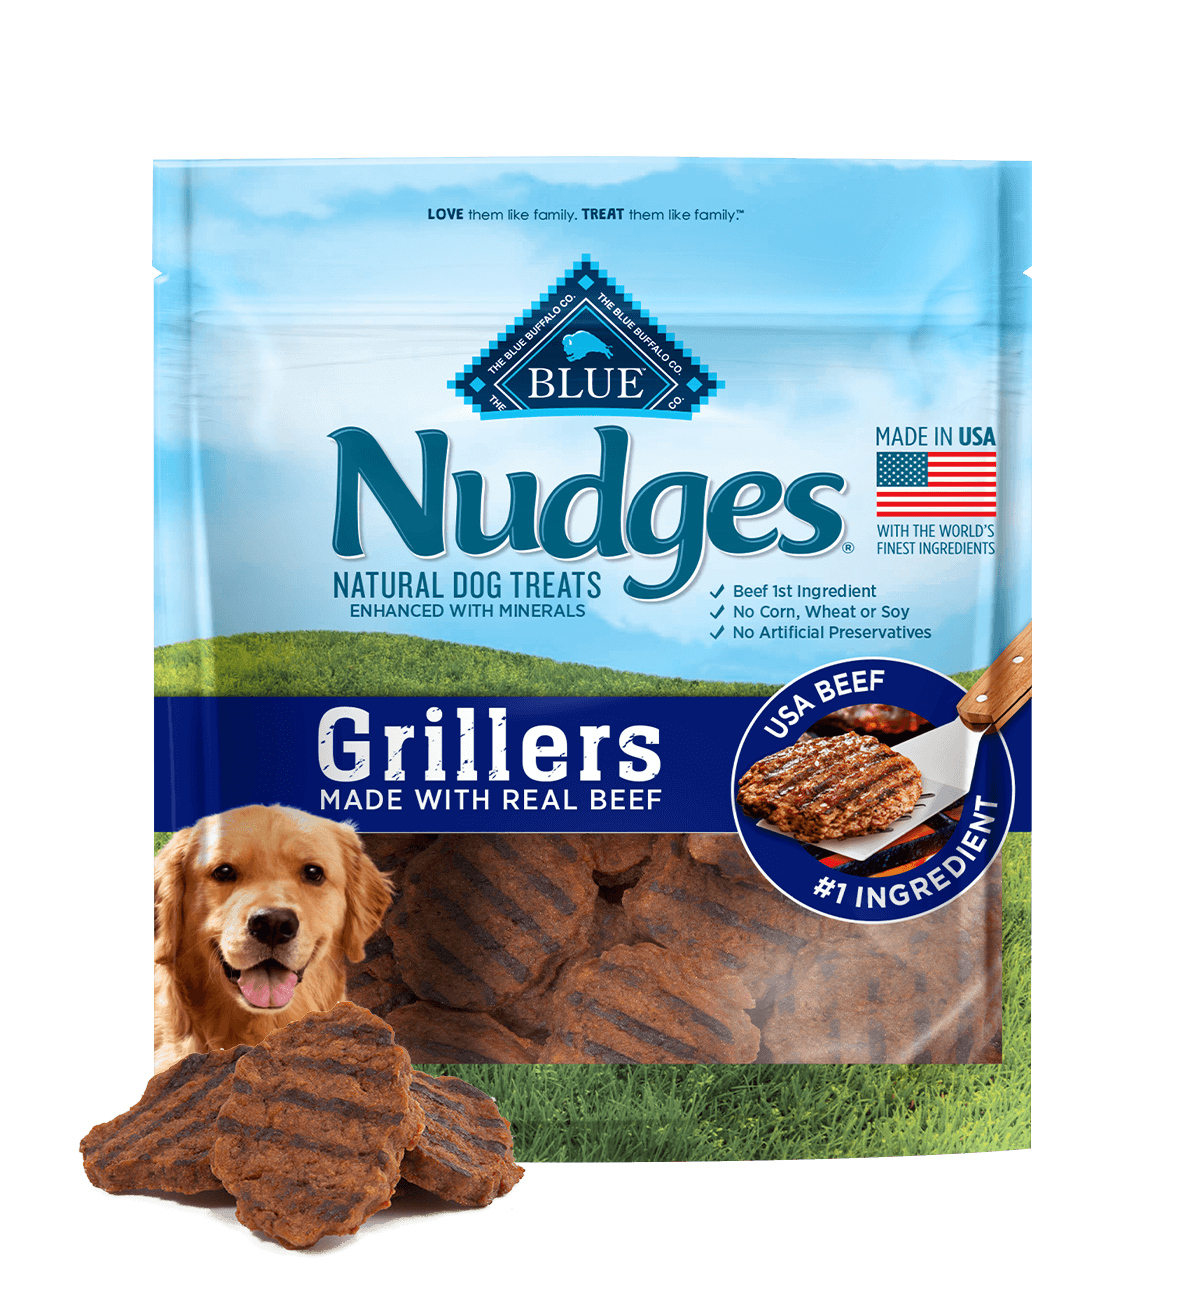 blue nudges ® deliciously charred real beef grillers dog treats